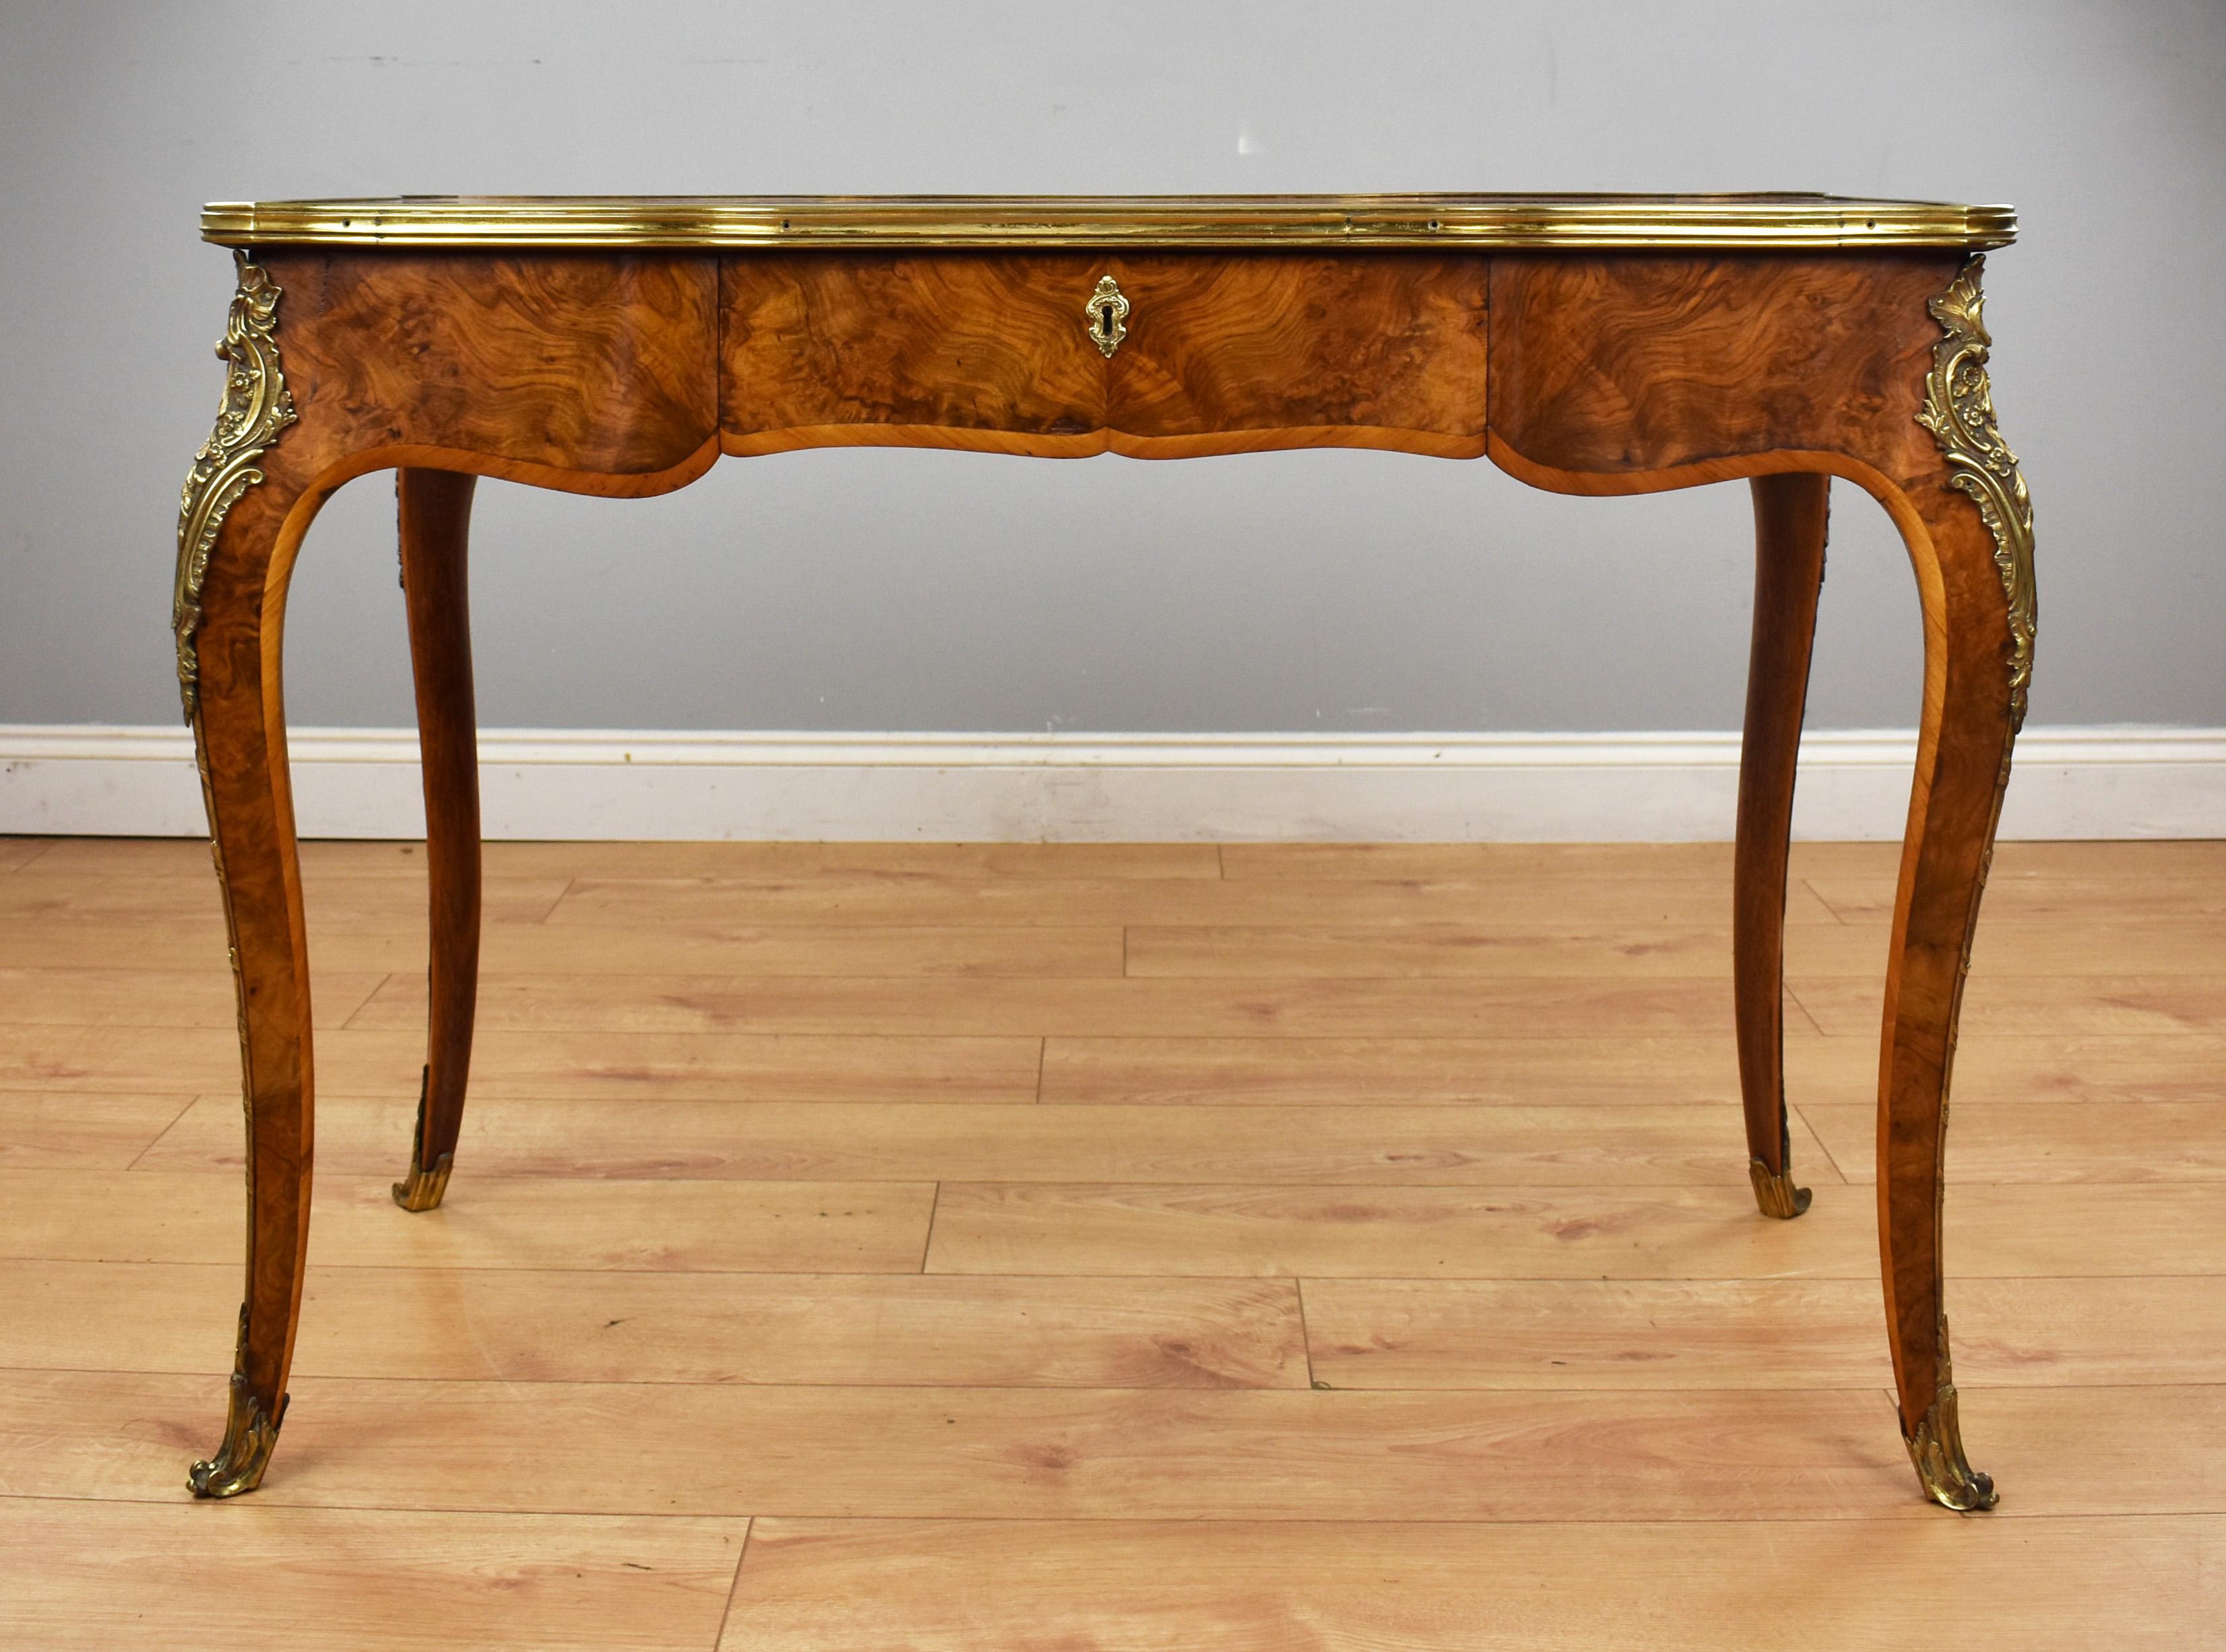 For sale is a fine quality mid Victorian Louis XV style burr walnut writing table, having a shaped quarter veneered top inlaid with a scrolled foliate border above a shaped frieze with a single drawer, standing on elegantly shaped legs the piece is